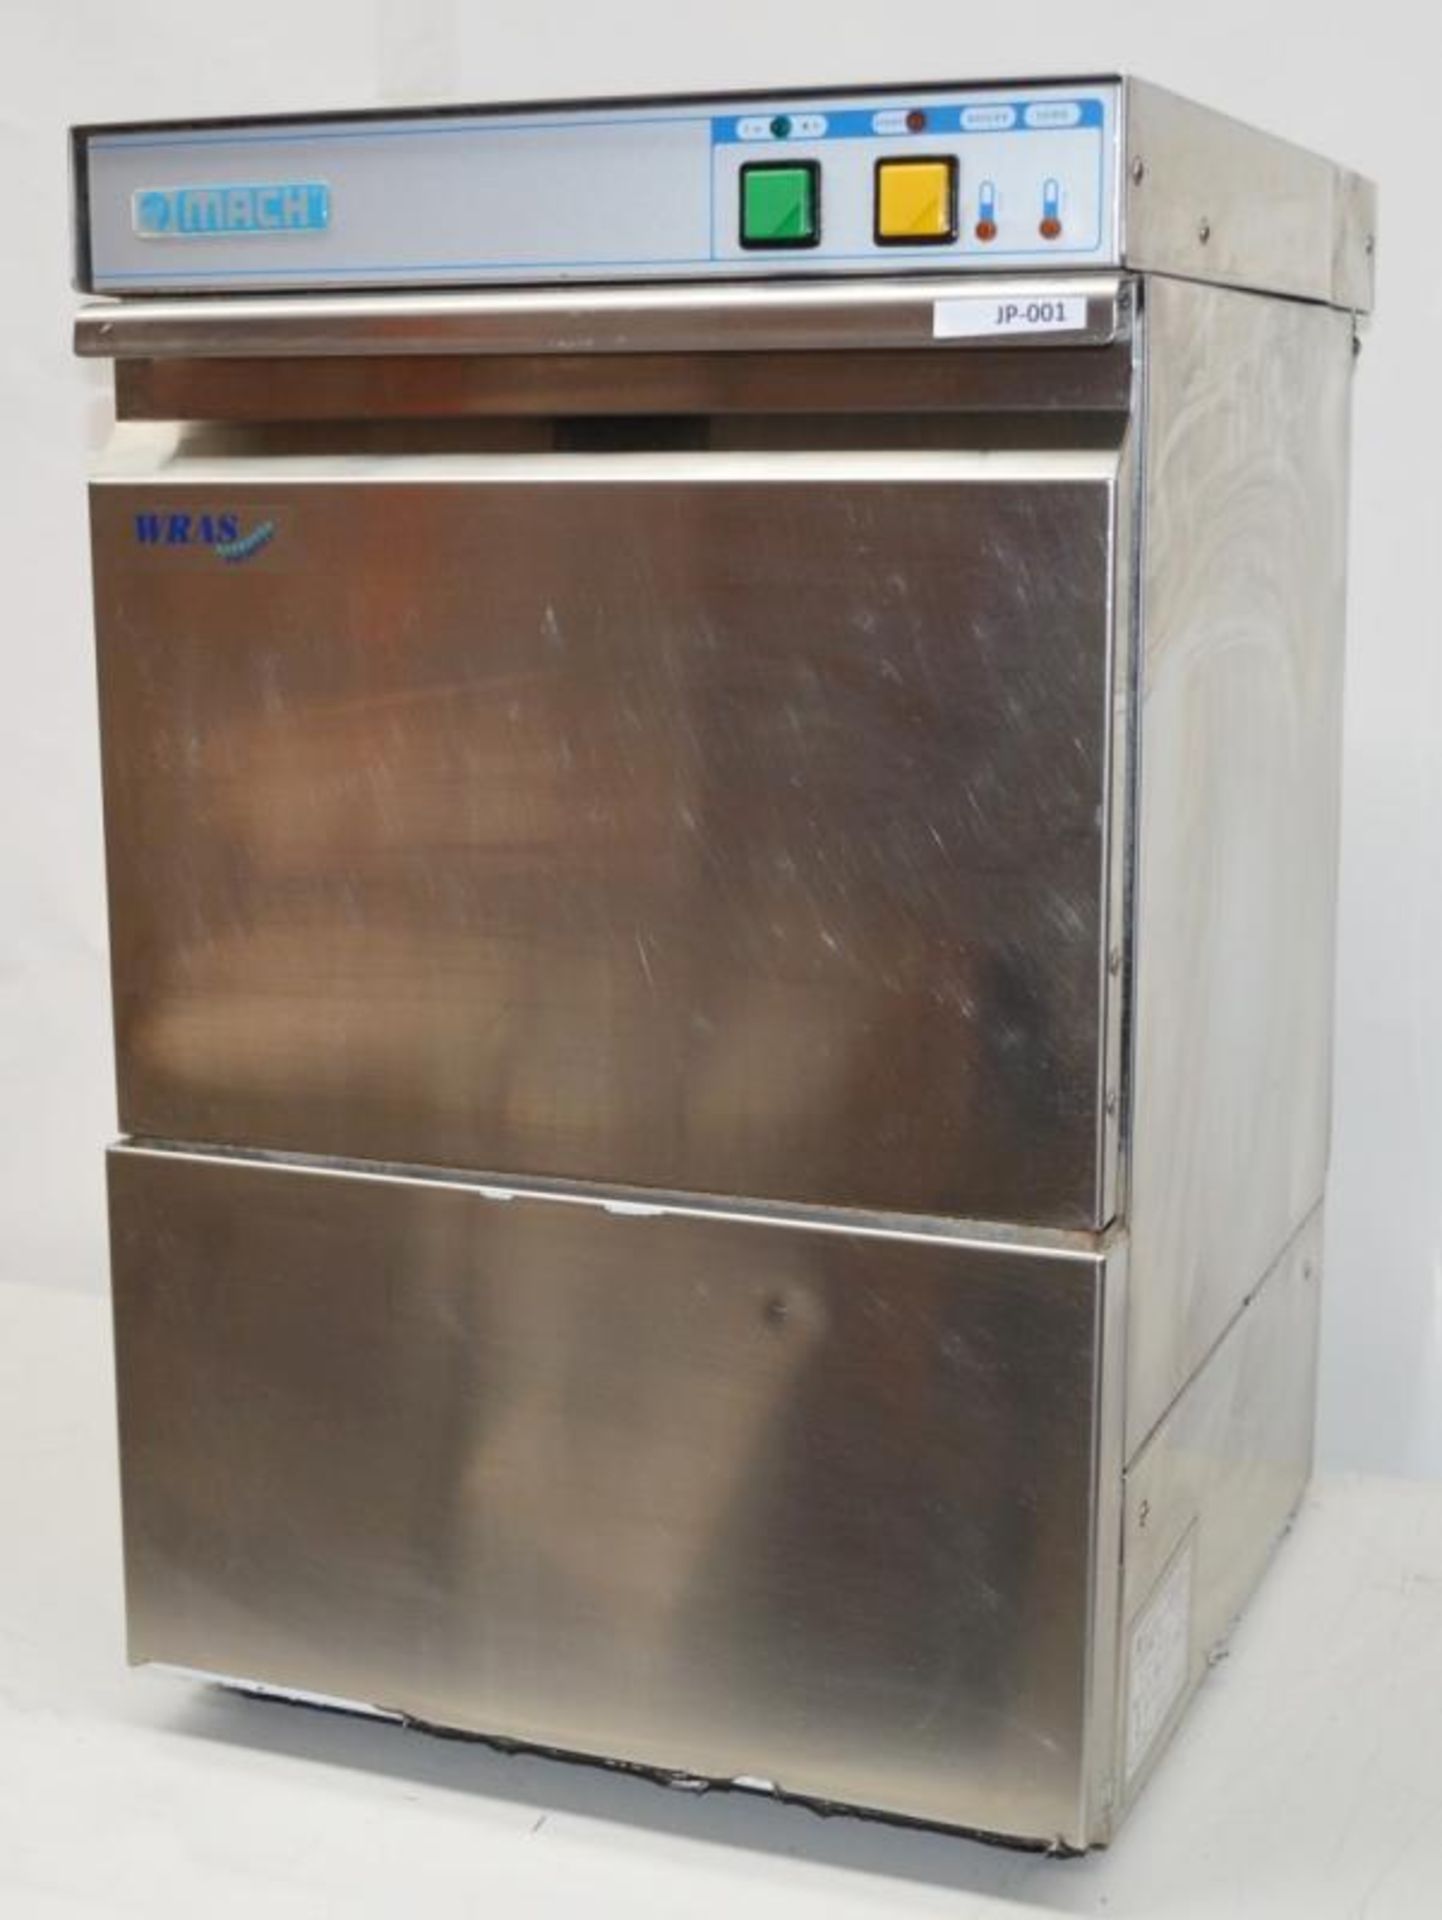 1 x MACH Commercial Glasswasher - Compact Size H65 x W41 x D49.5 cms - Stainless Steel Finish - 240v